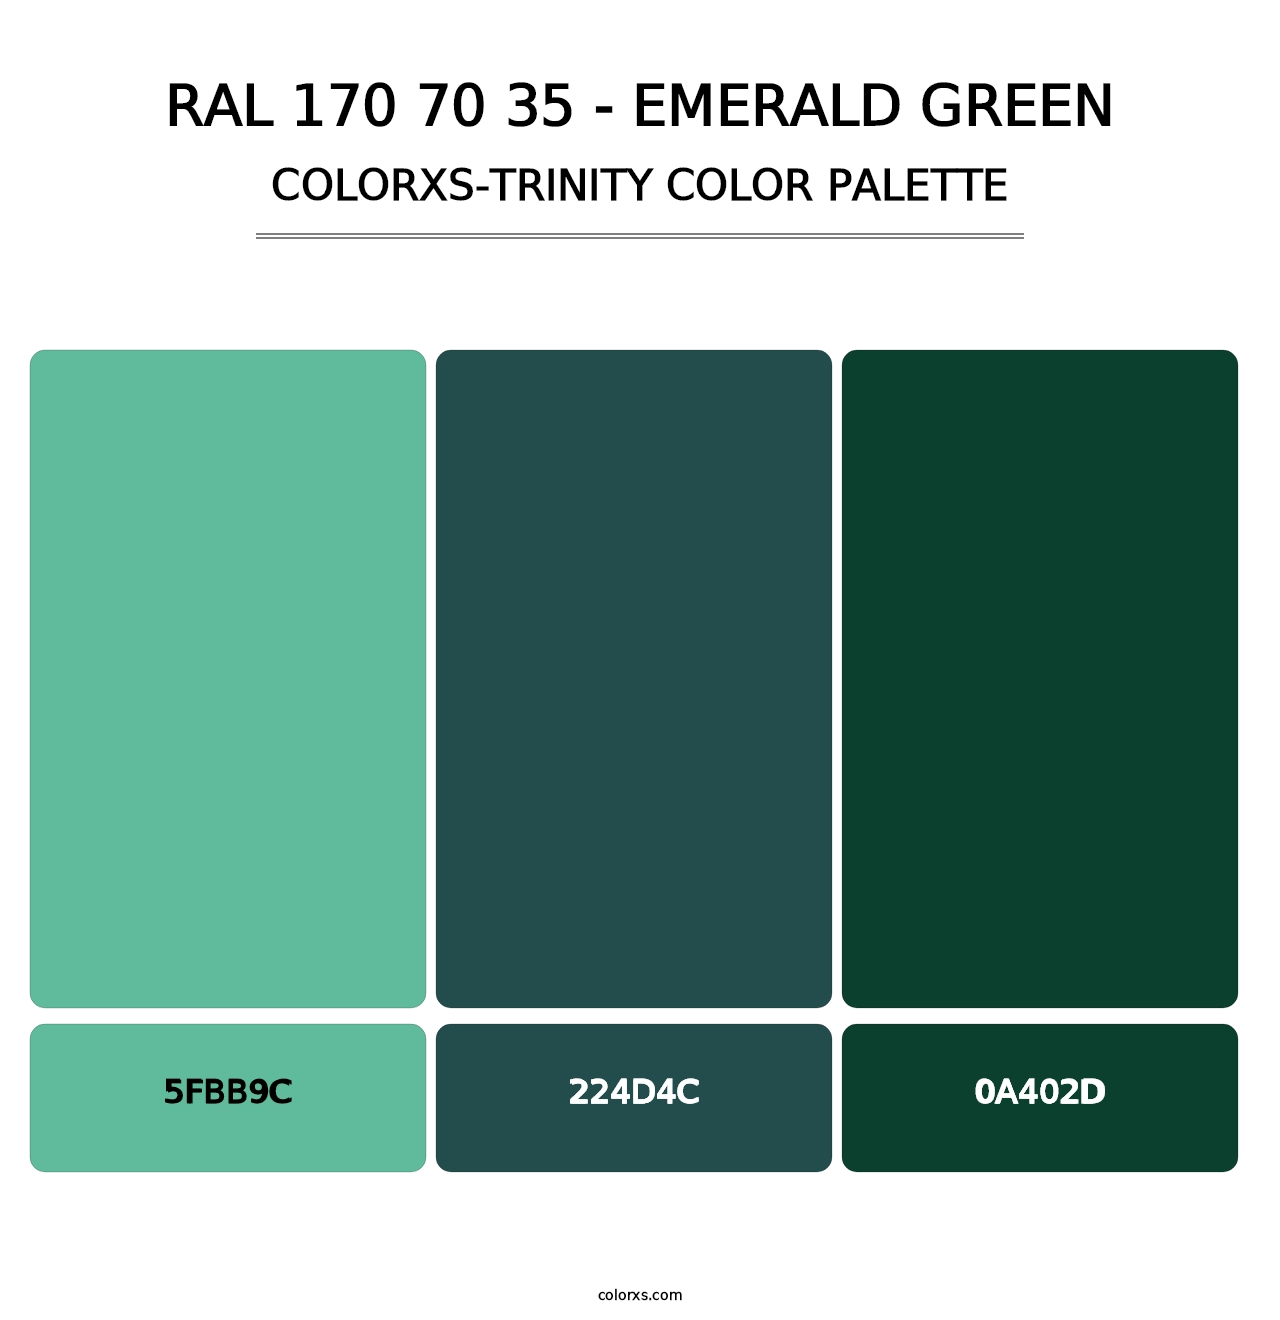 RAL 170 70 35 - Emerald Green - Colorxs Trinity Palette